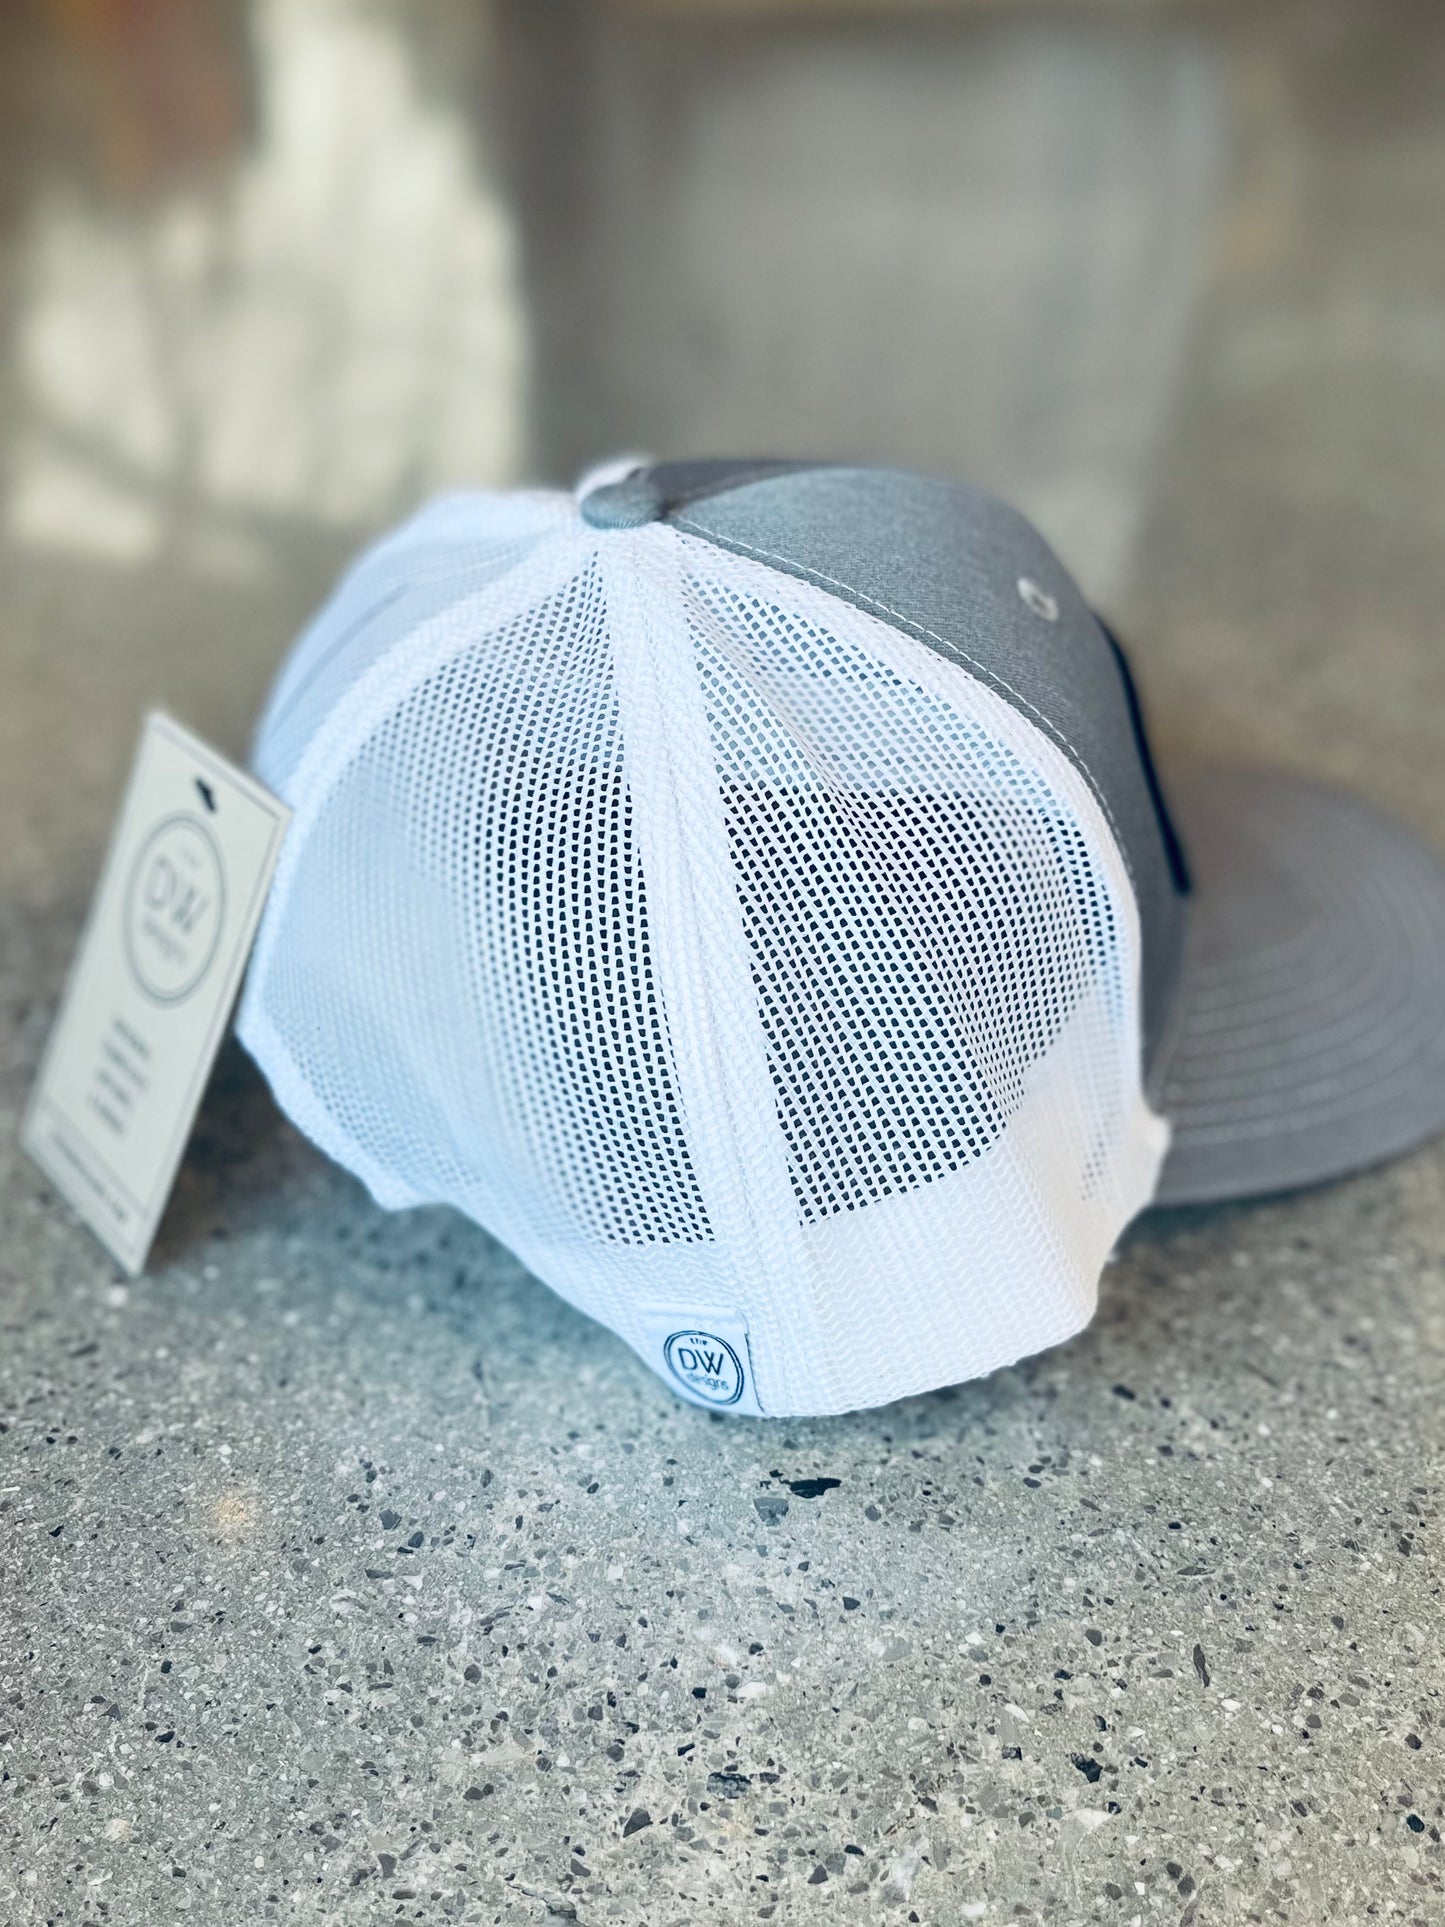 The Gameday Knox Trucker Hat